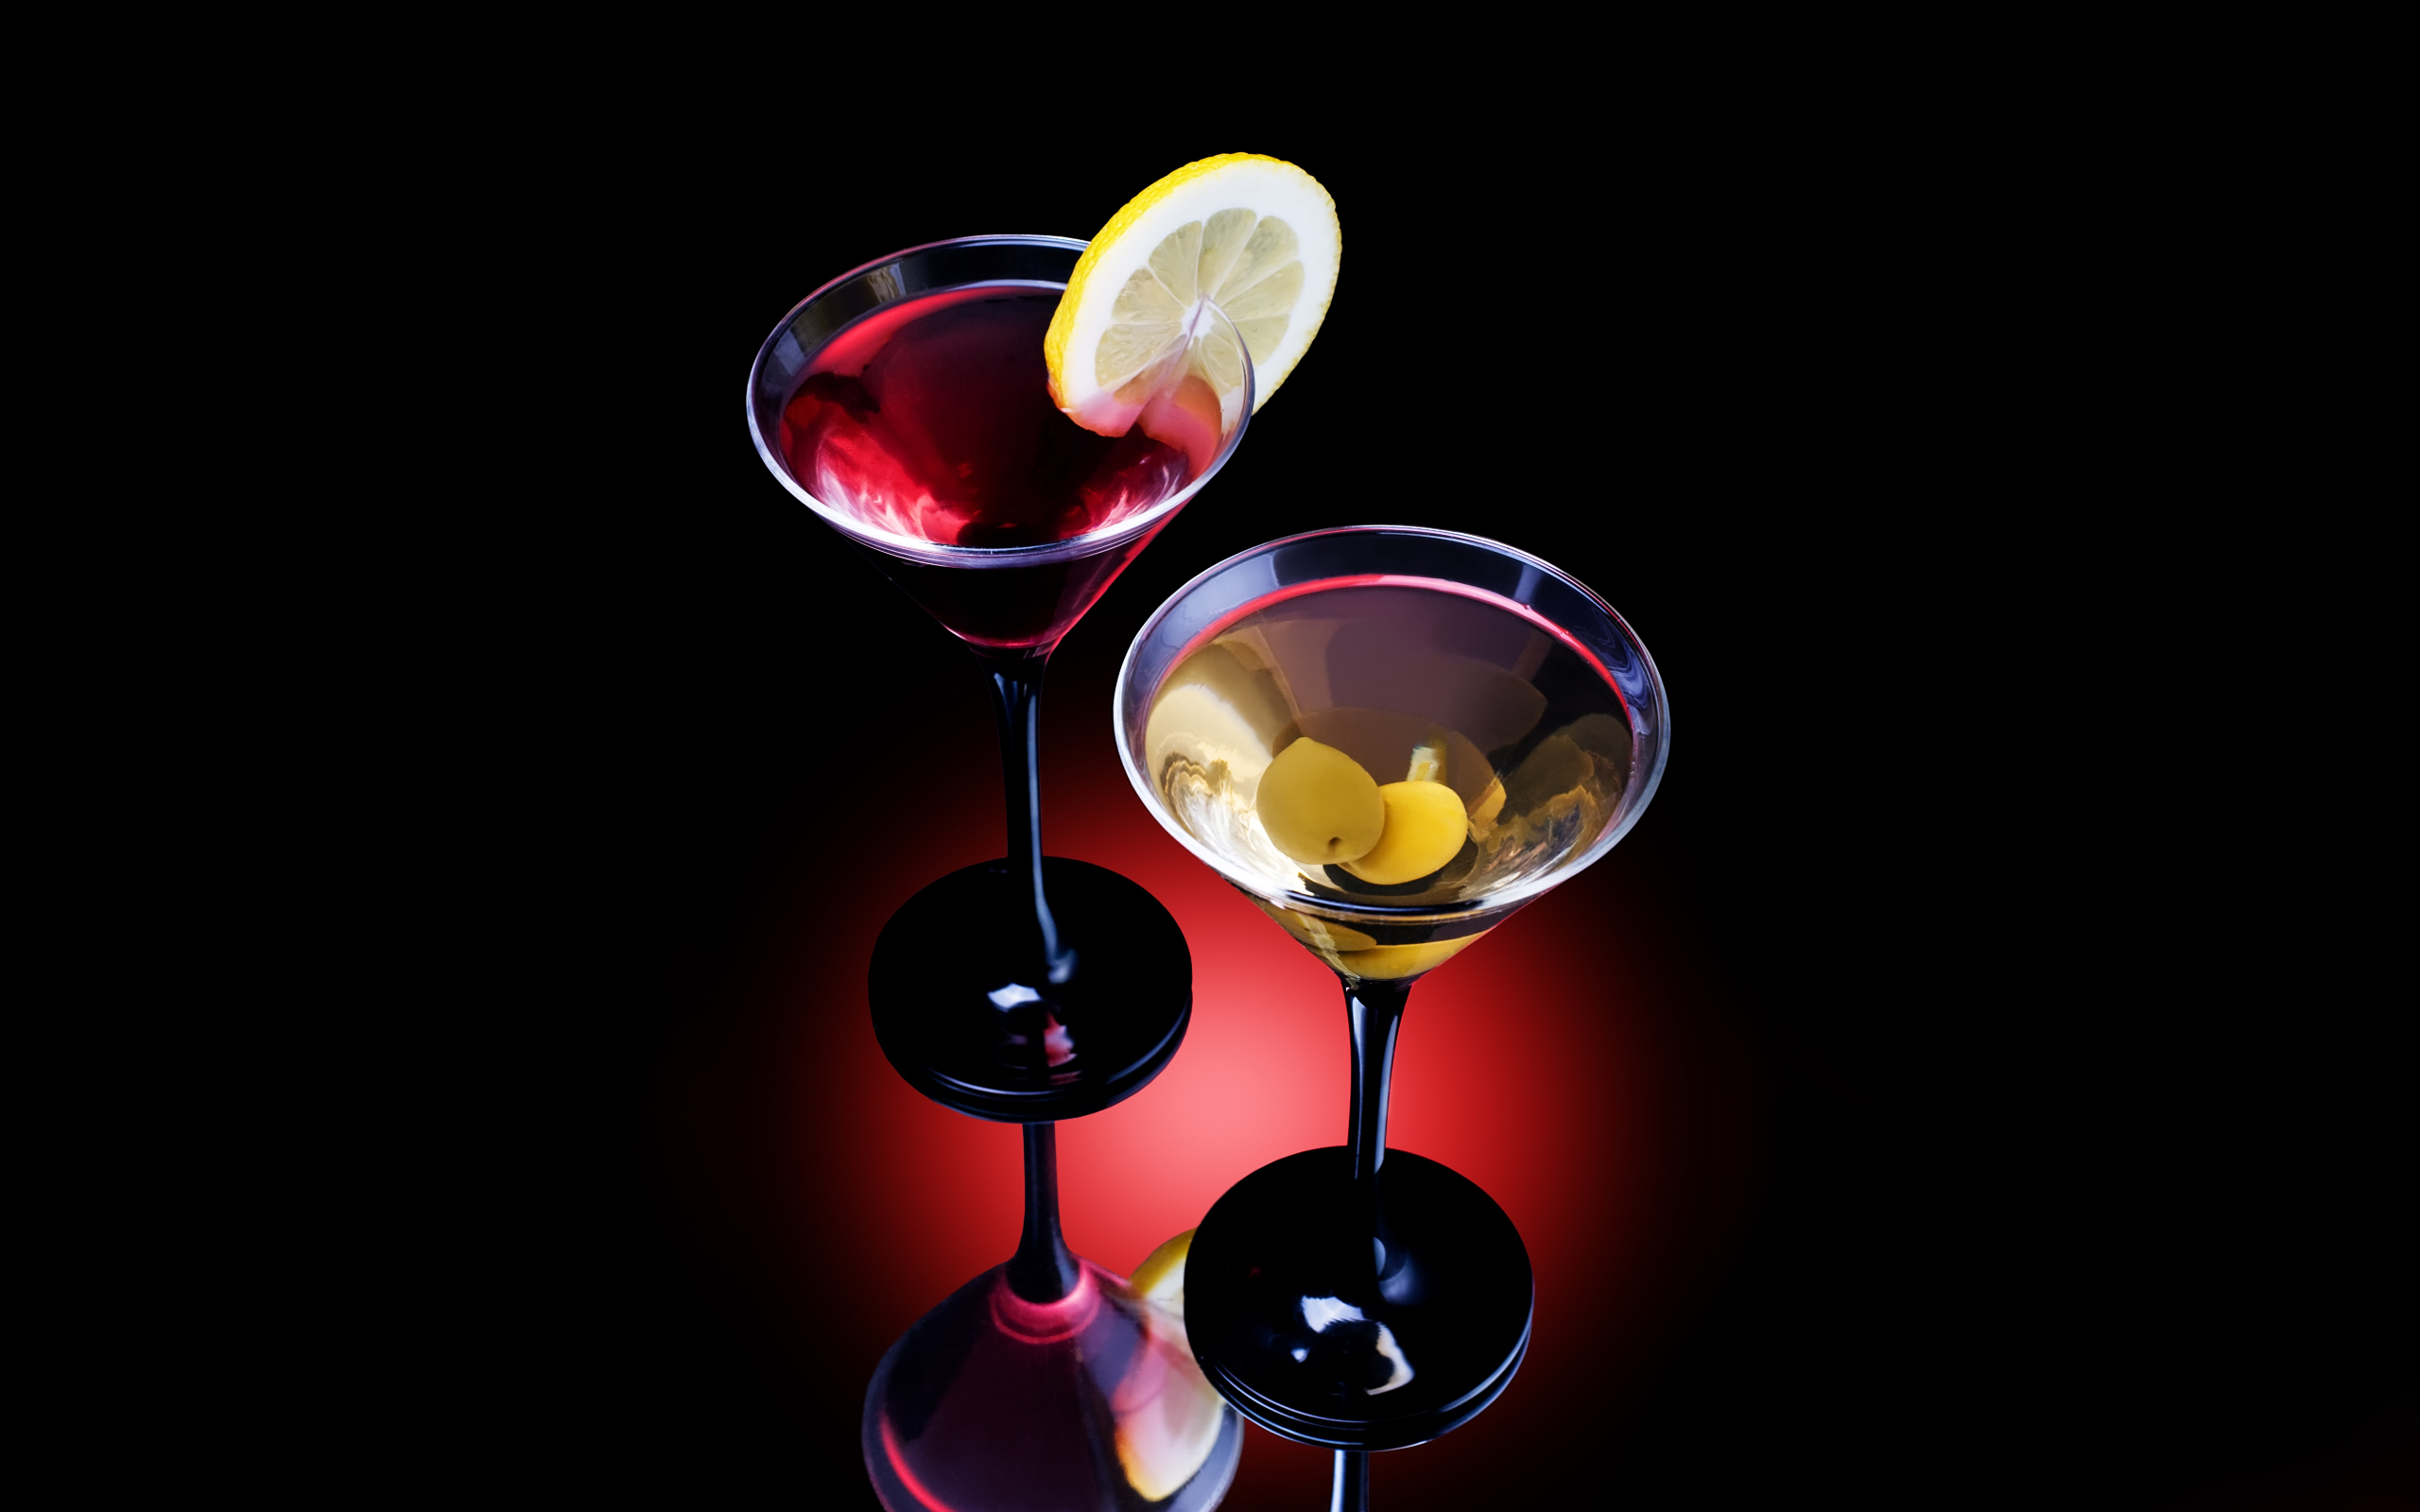 food and drink wallpaper,martini glass,drink,cocktail,martini,alcoholic beverage